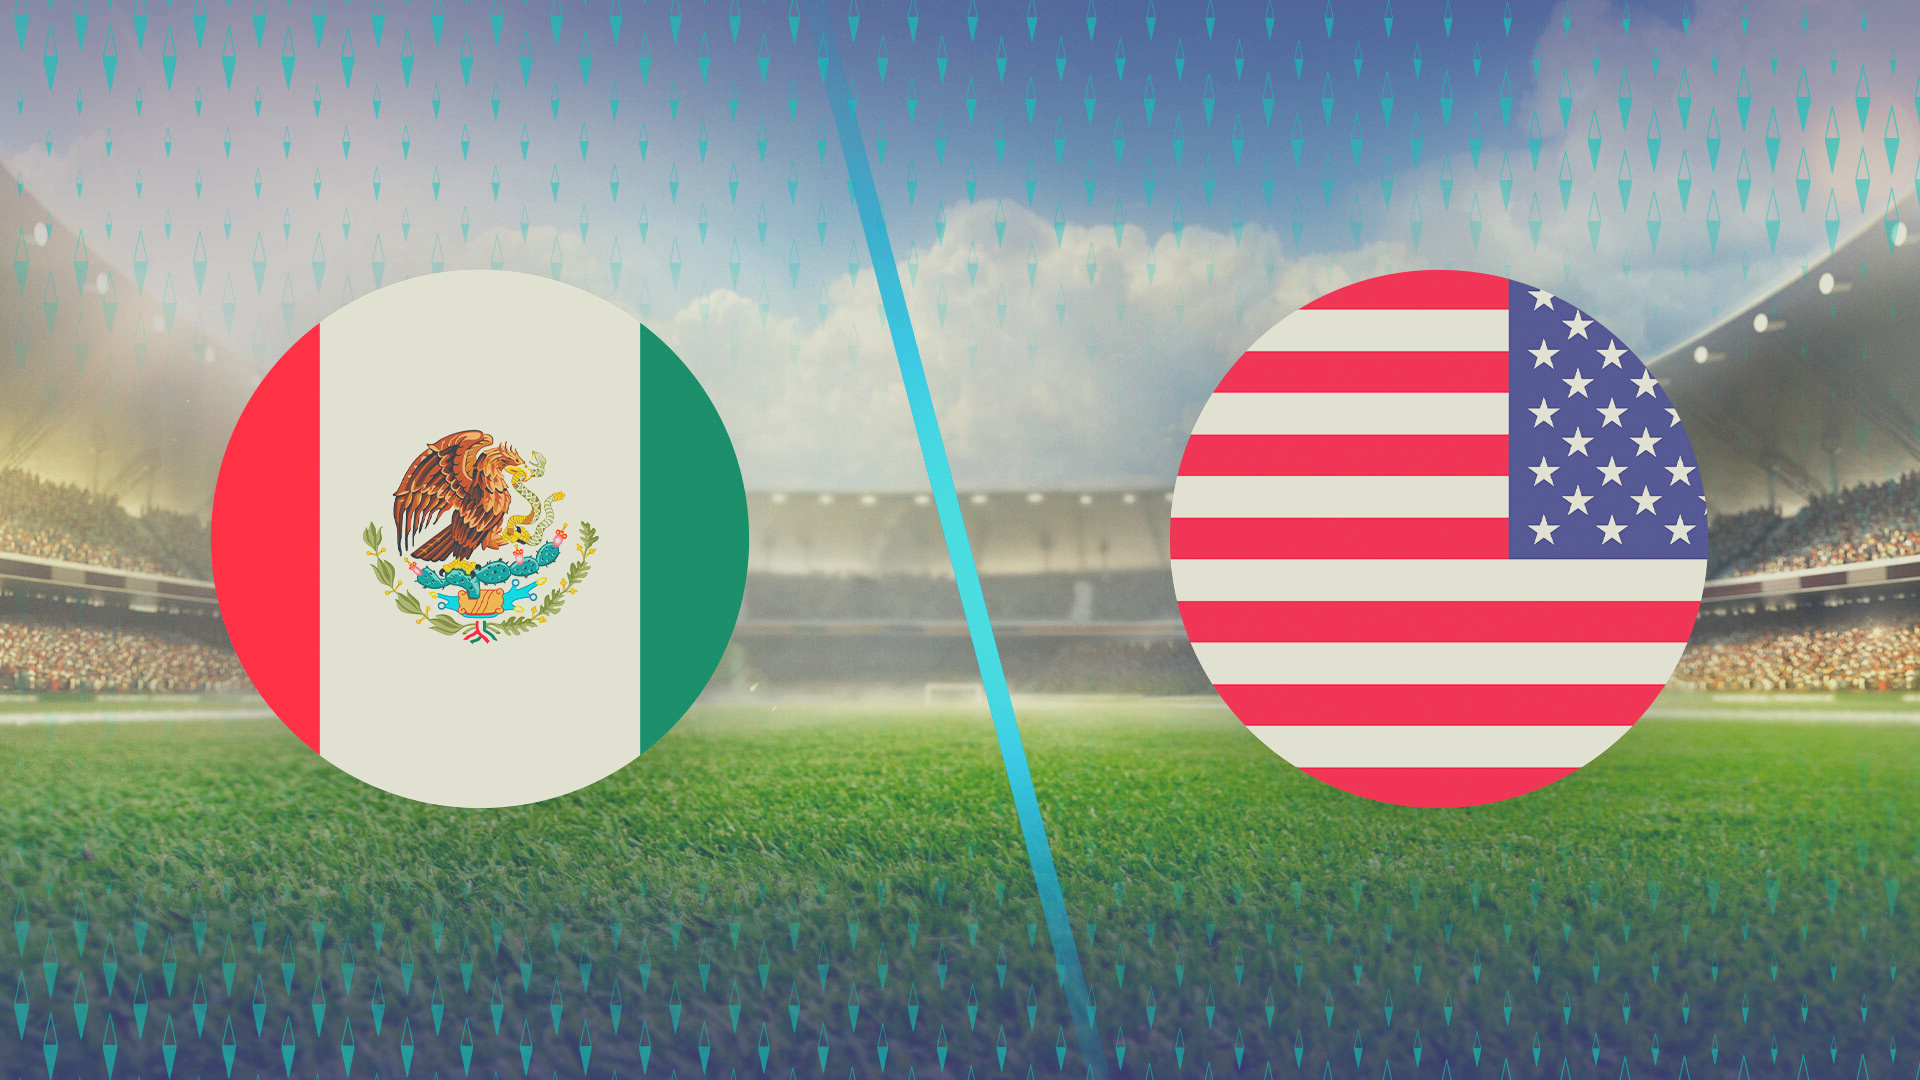 Score and results for the United States vs. Mexico Christian Pulisic's